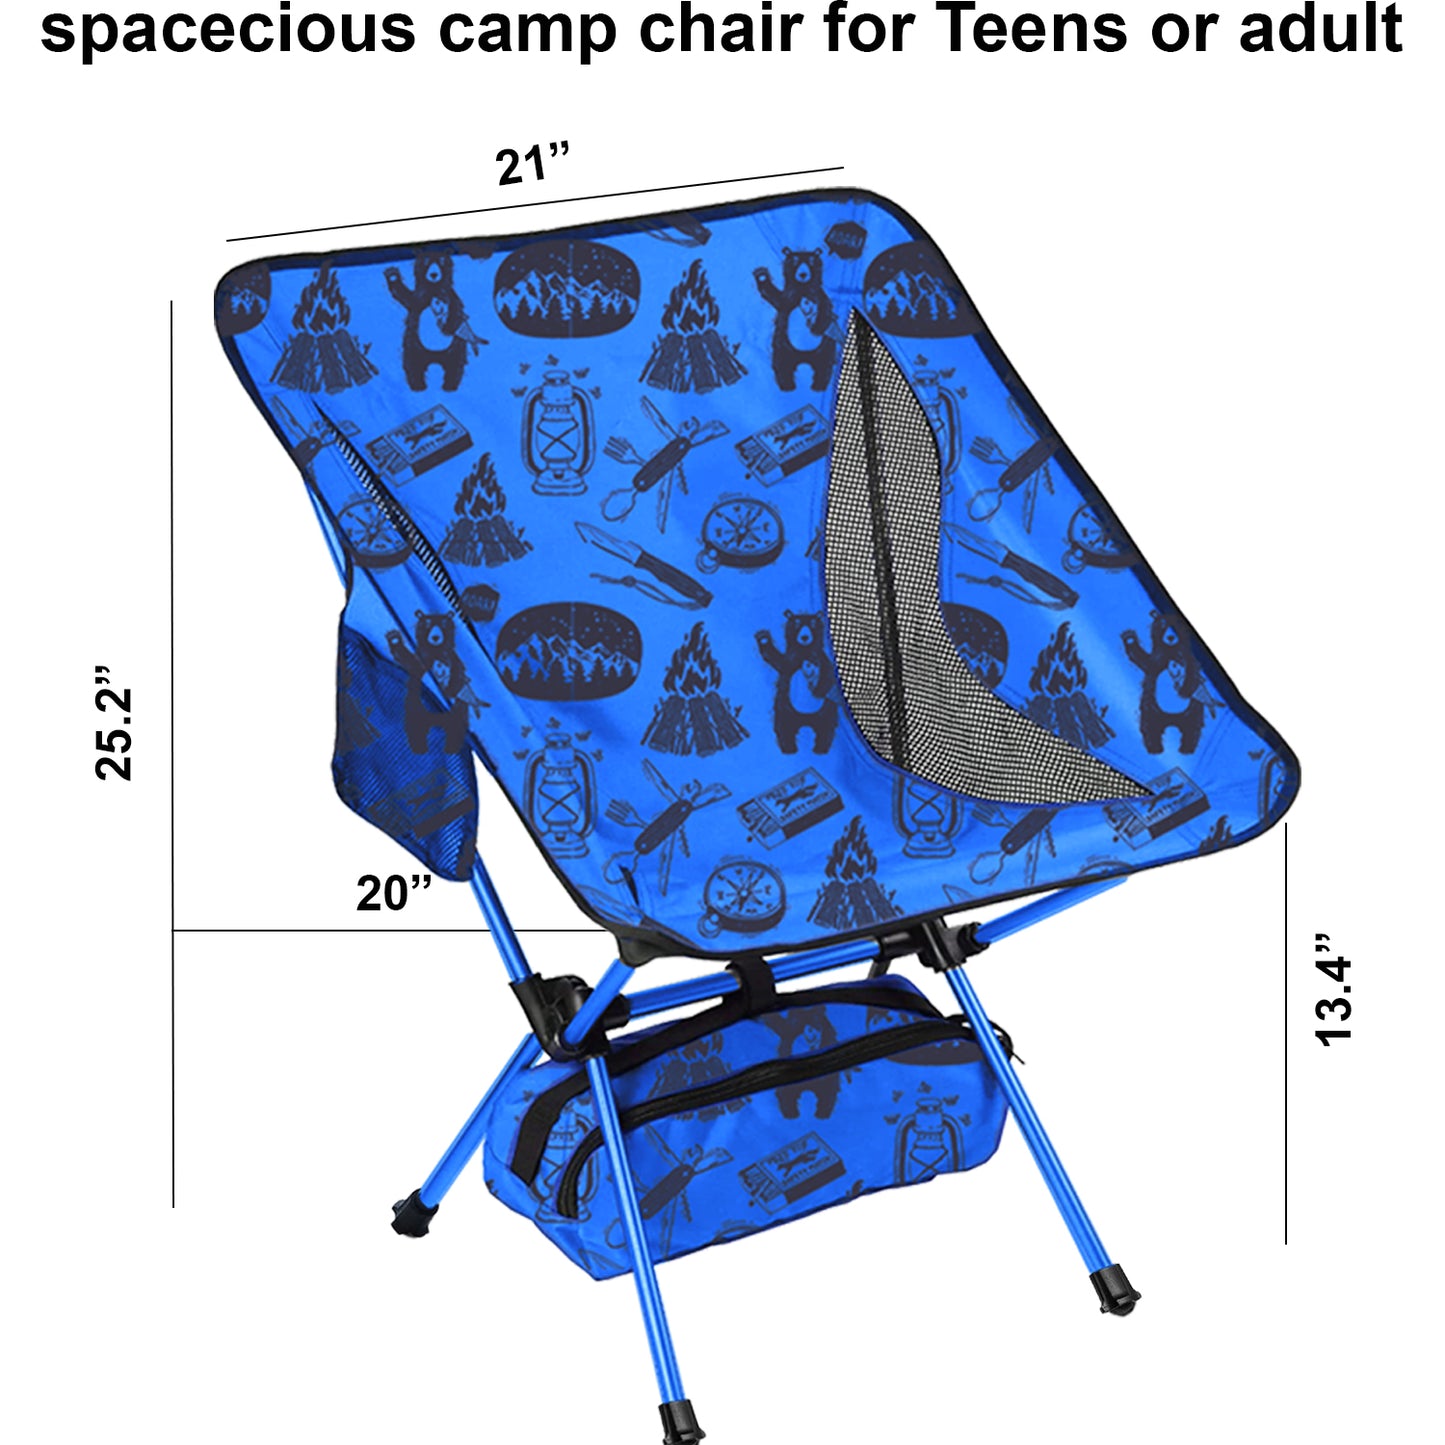 Youth camping chair - Adventure theme